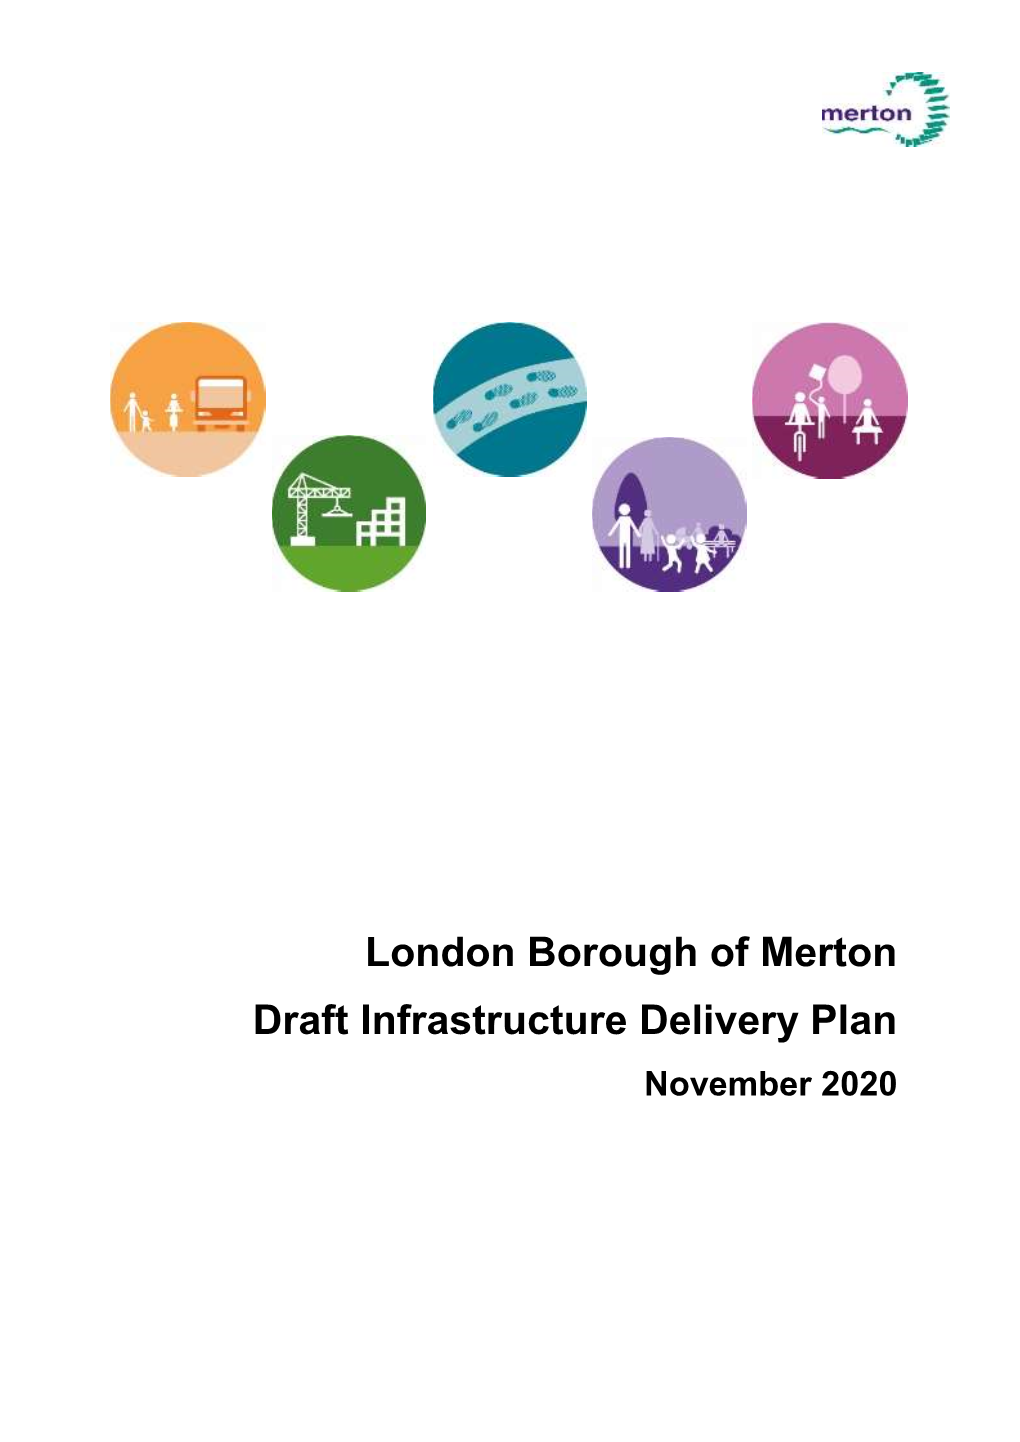 London Borough of Merton Draft Infrastructure Delivery Plan